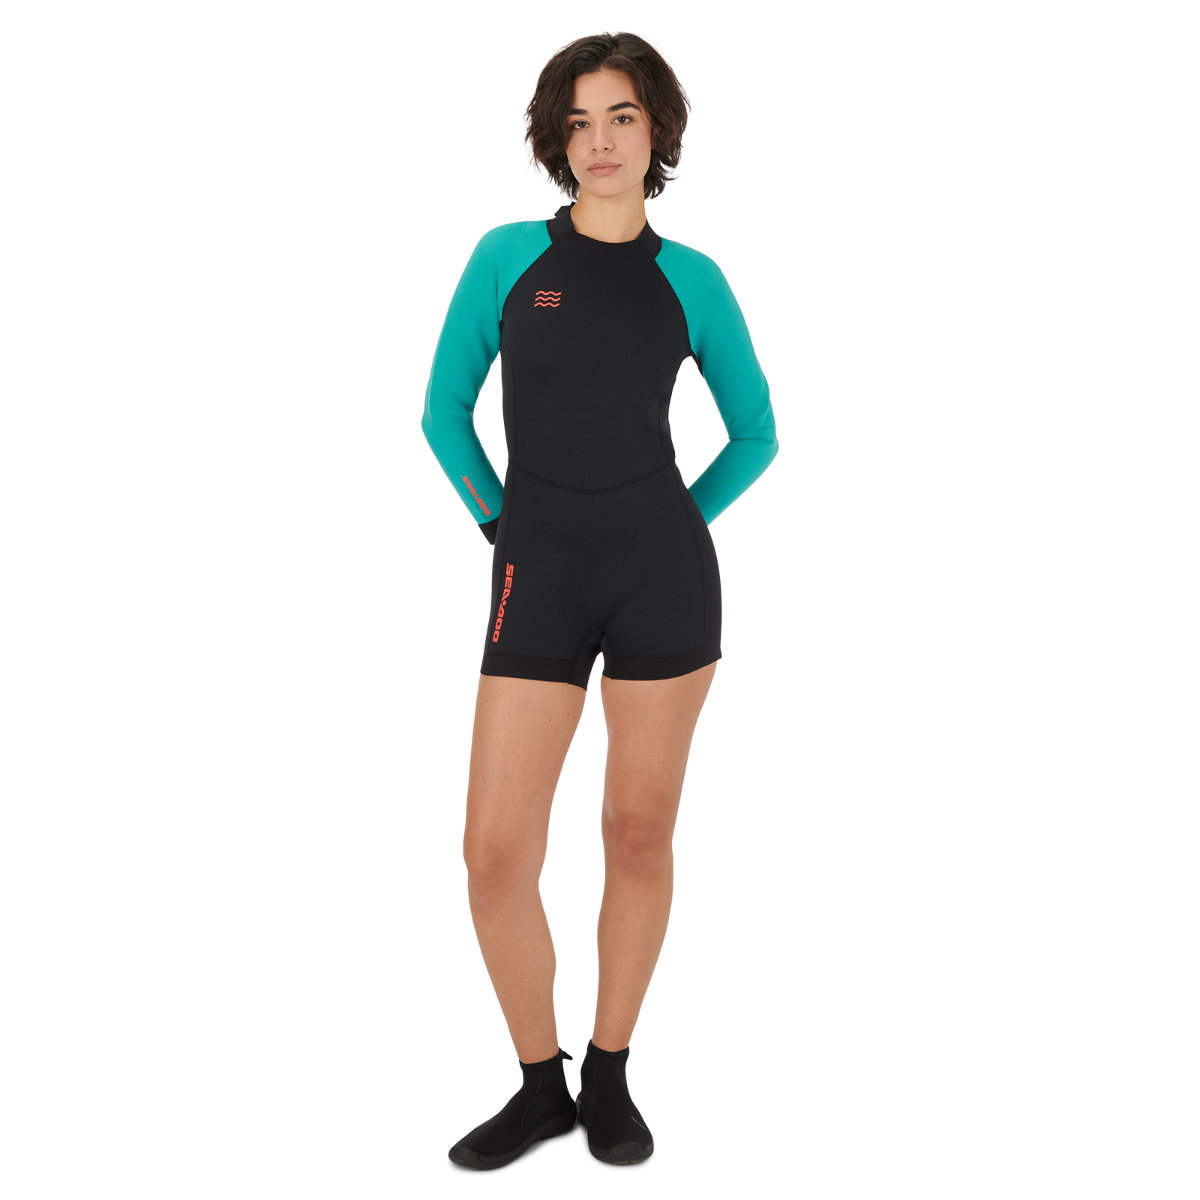 Women's 2mm Shorty Wetsuit Long Sleeves